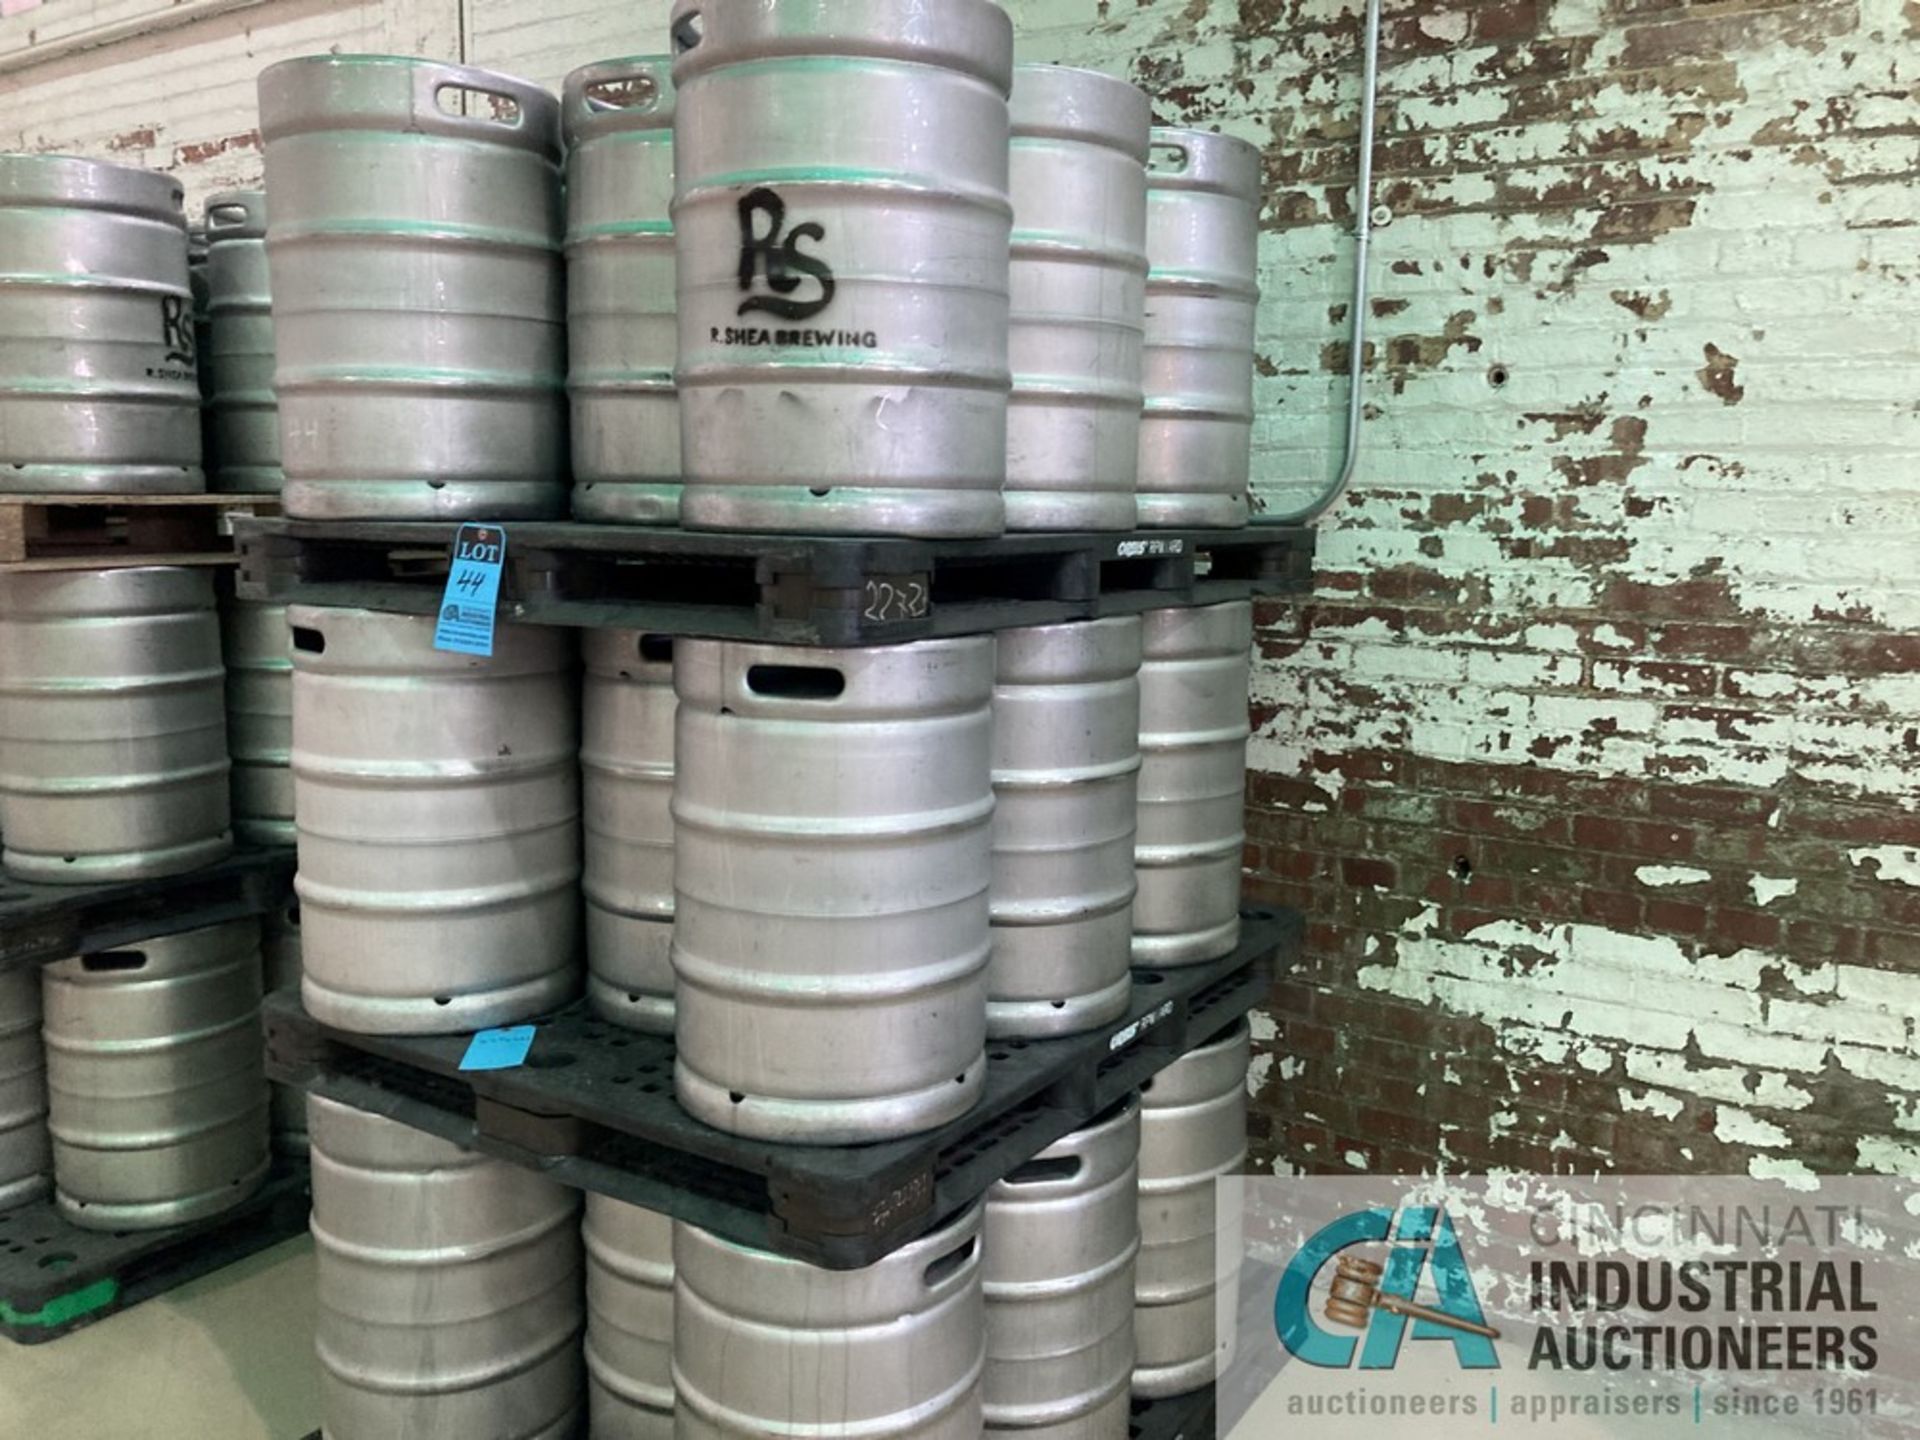 1/2 BBL KEGS **For convenience, the loading fee of $50.00 will be added to the invoice and paid to